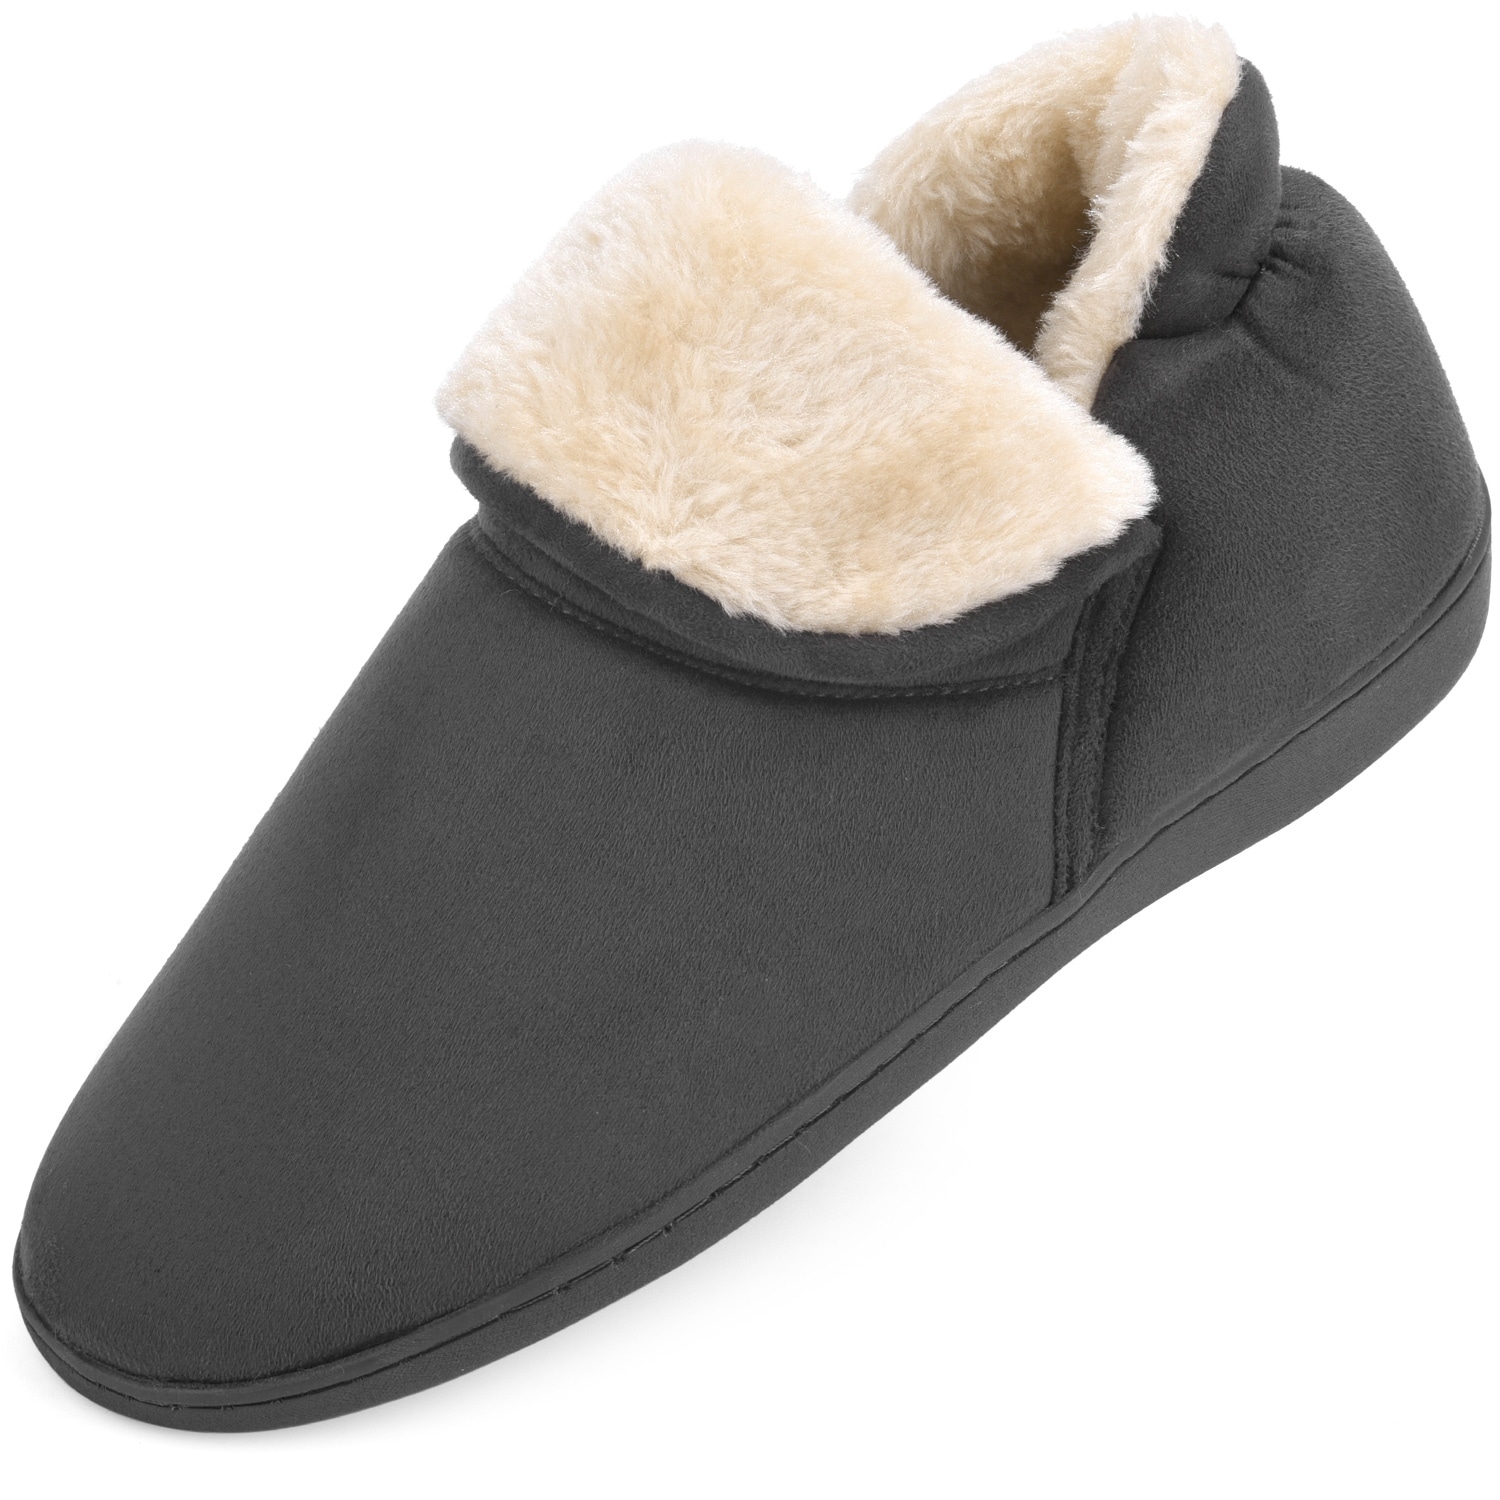 womens bootie slippers with rubber soles